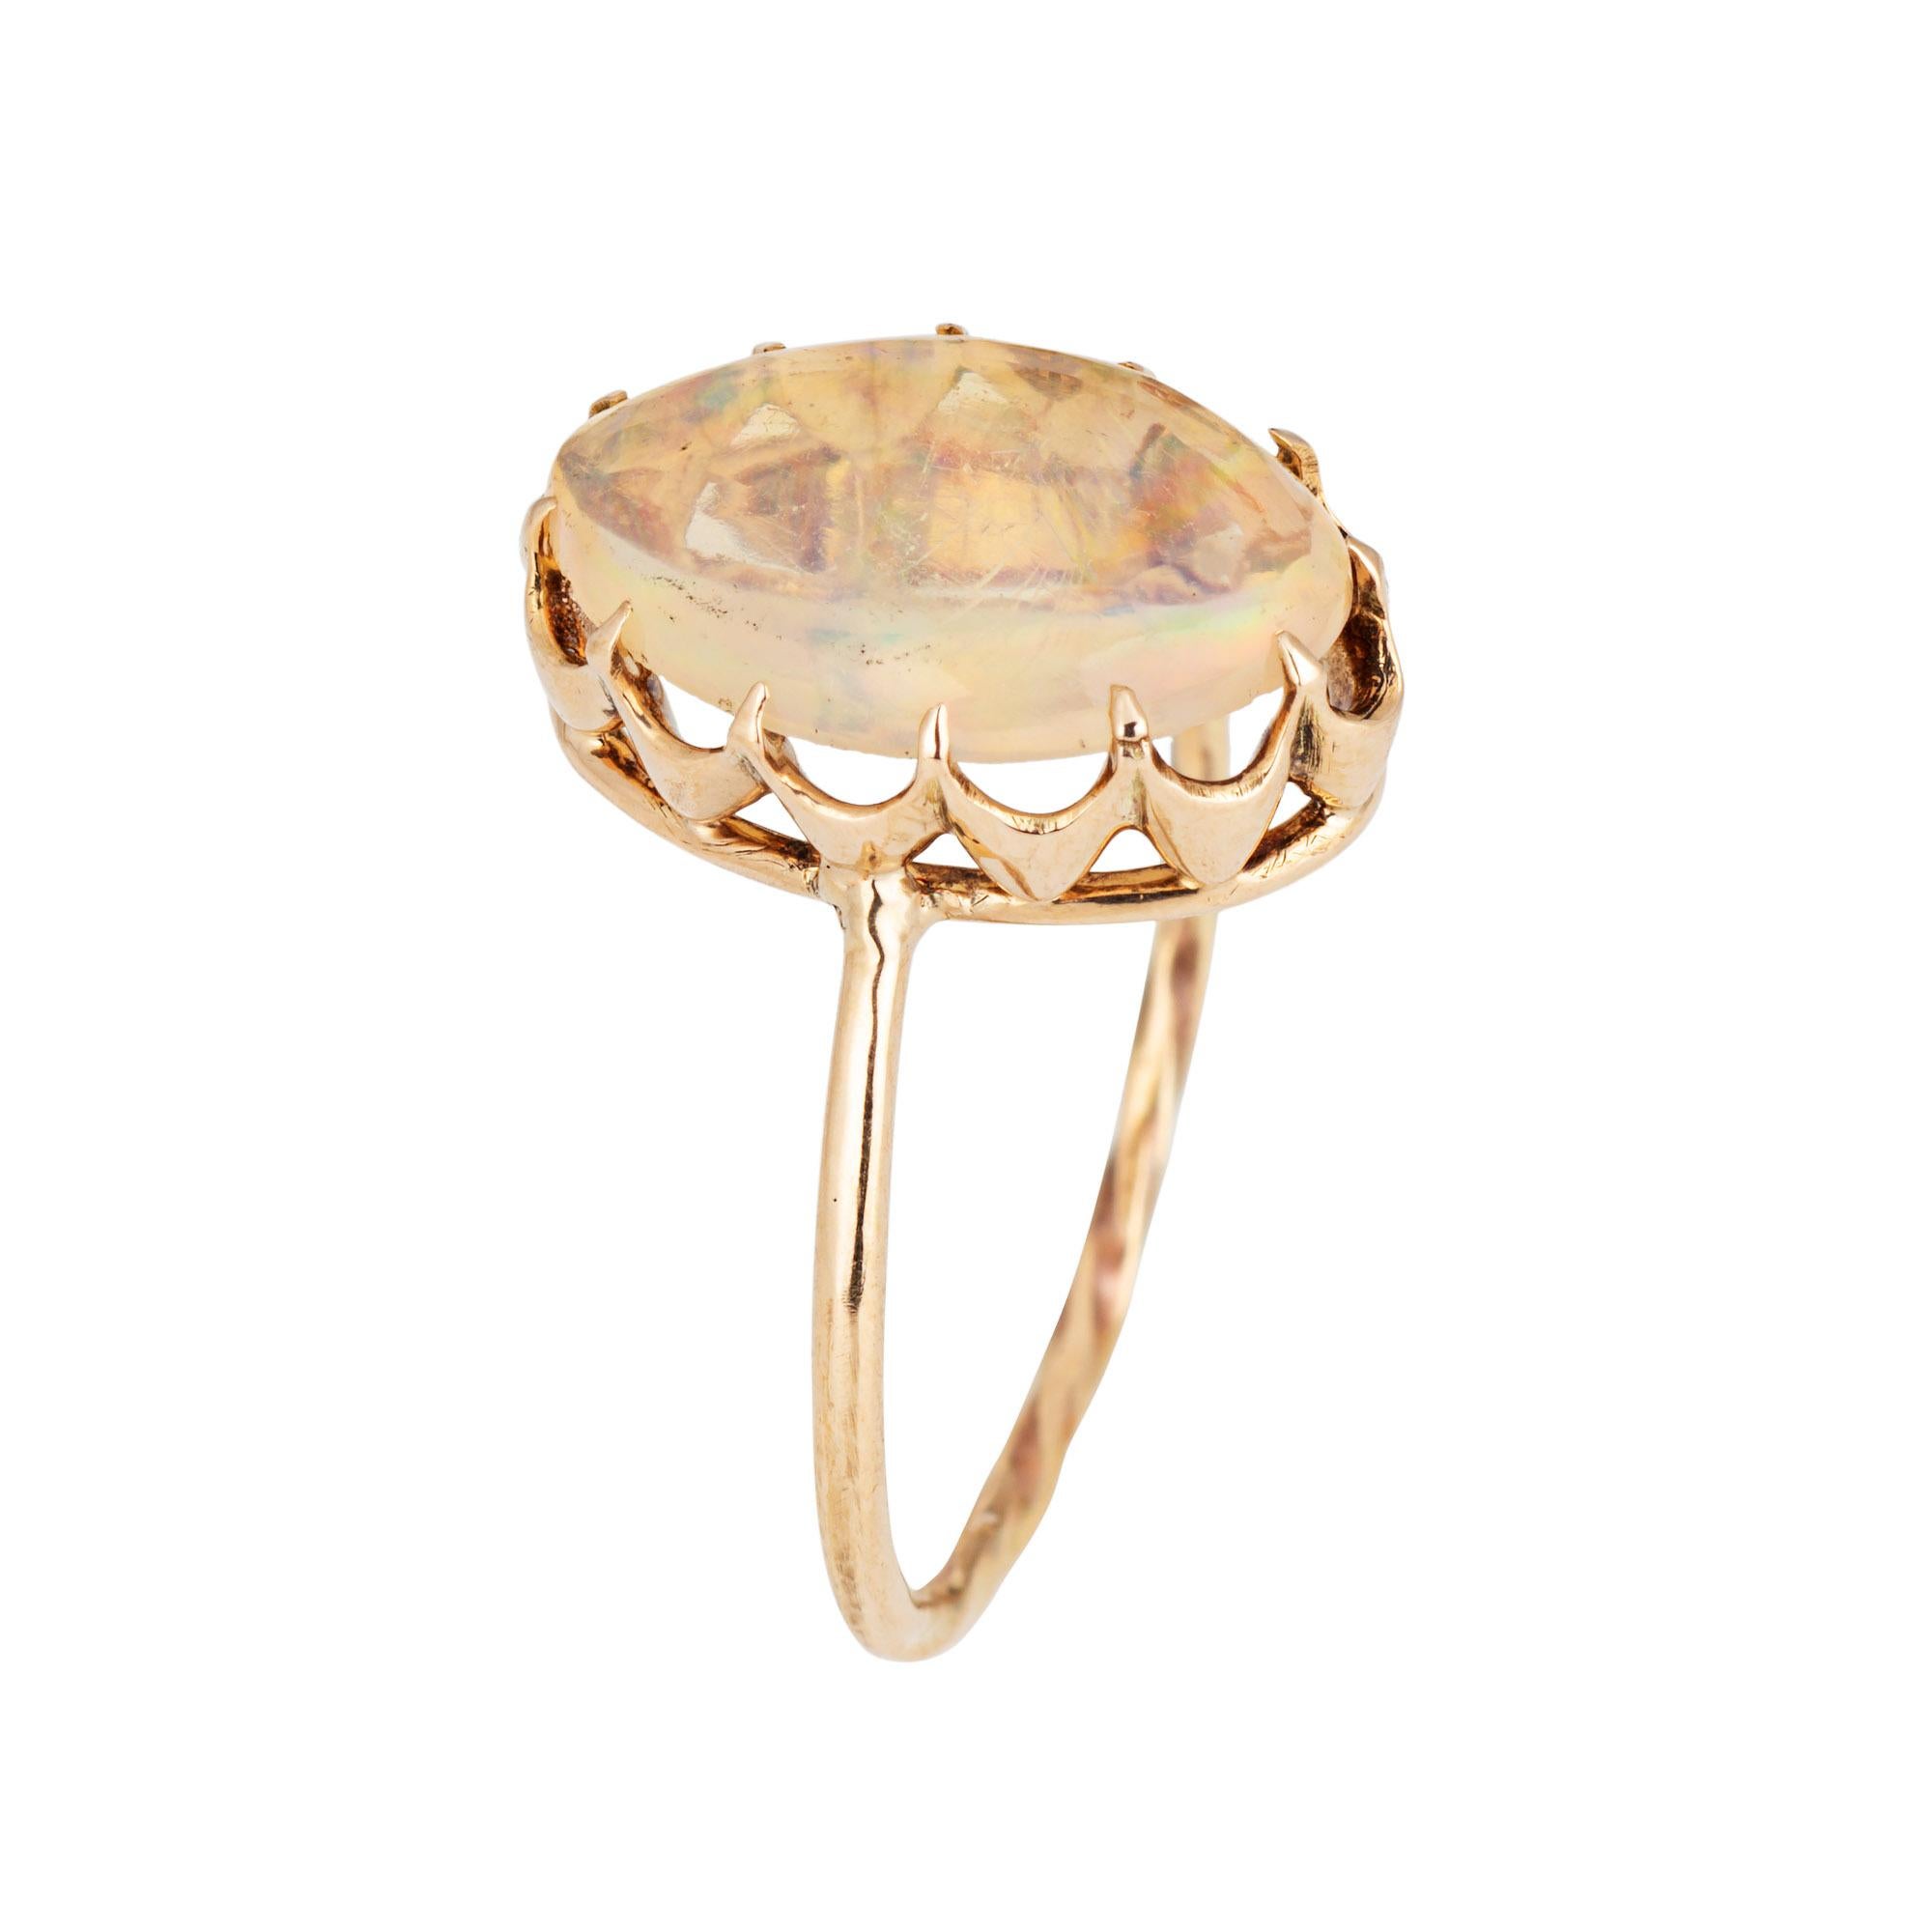 Originally an antique Victorian era stick pin (circa 1880s to 1900s), the jelly opal ring is crafted in 14 karat yellow gold.

The ring is mounted with the original stick pin. Our jeweler rounded the stick pin into a slim band for the finger. The